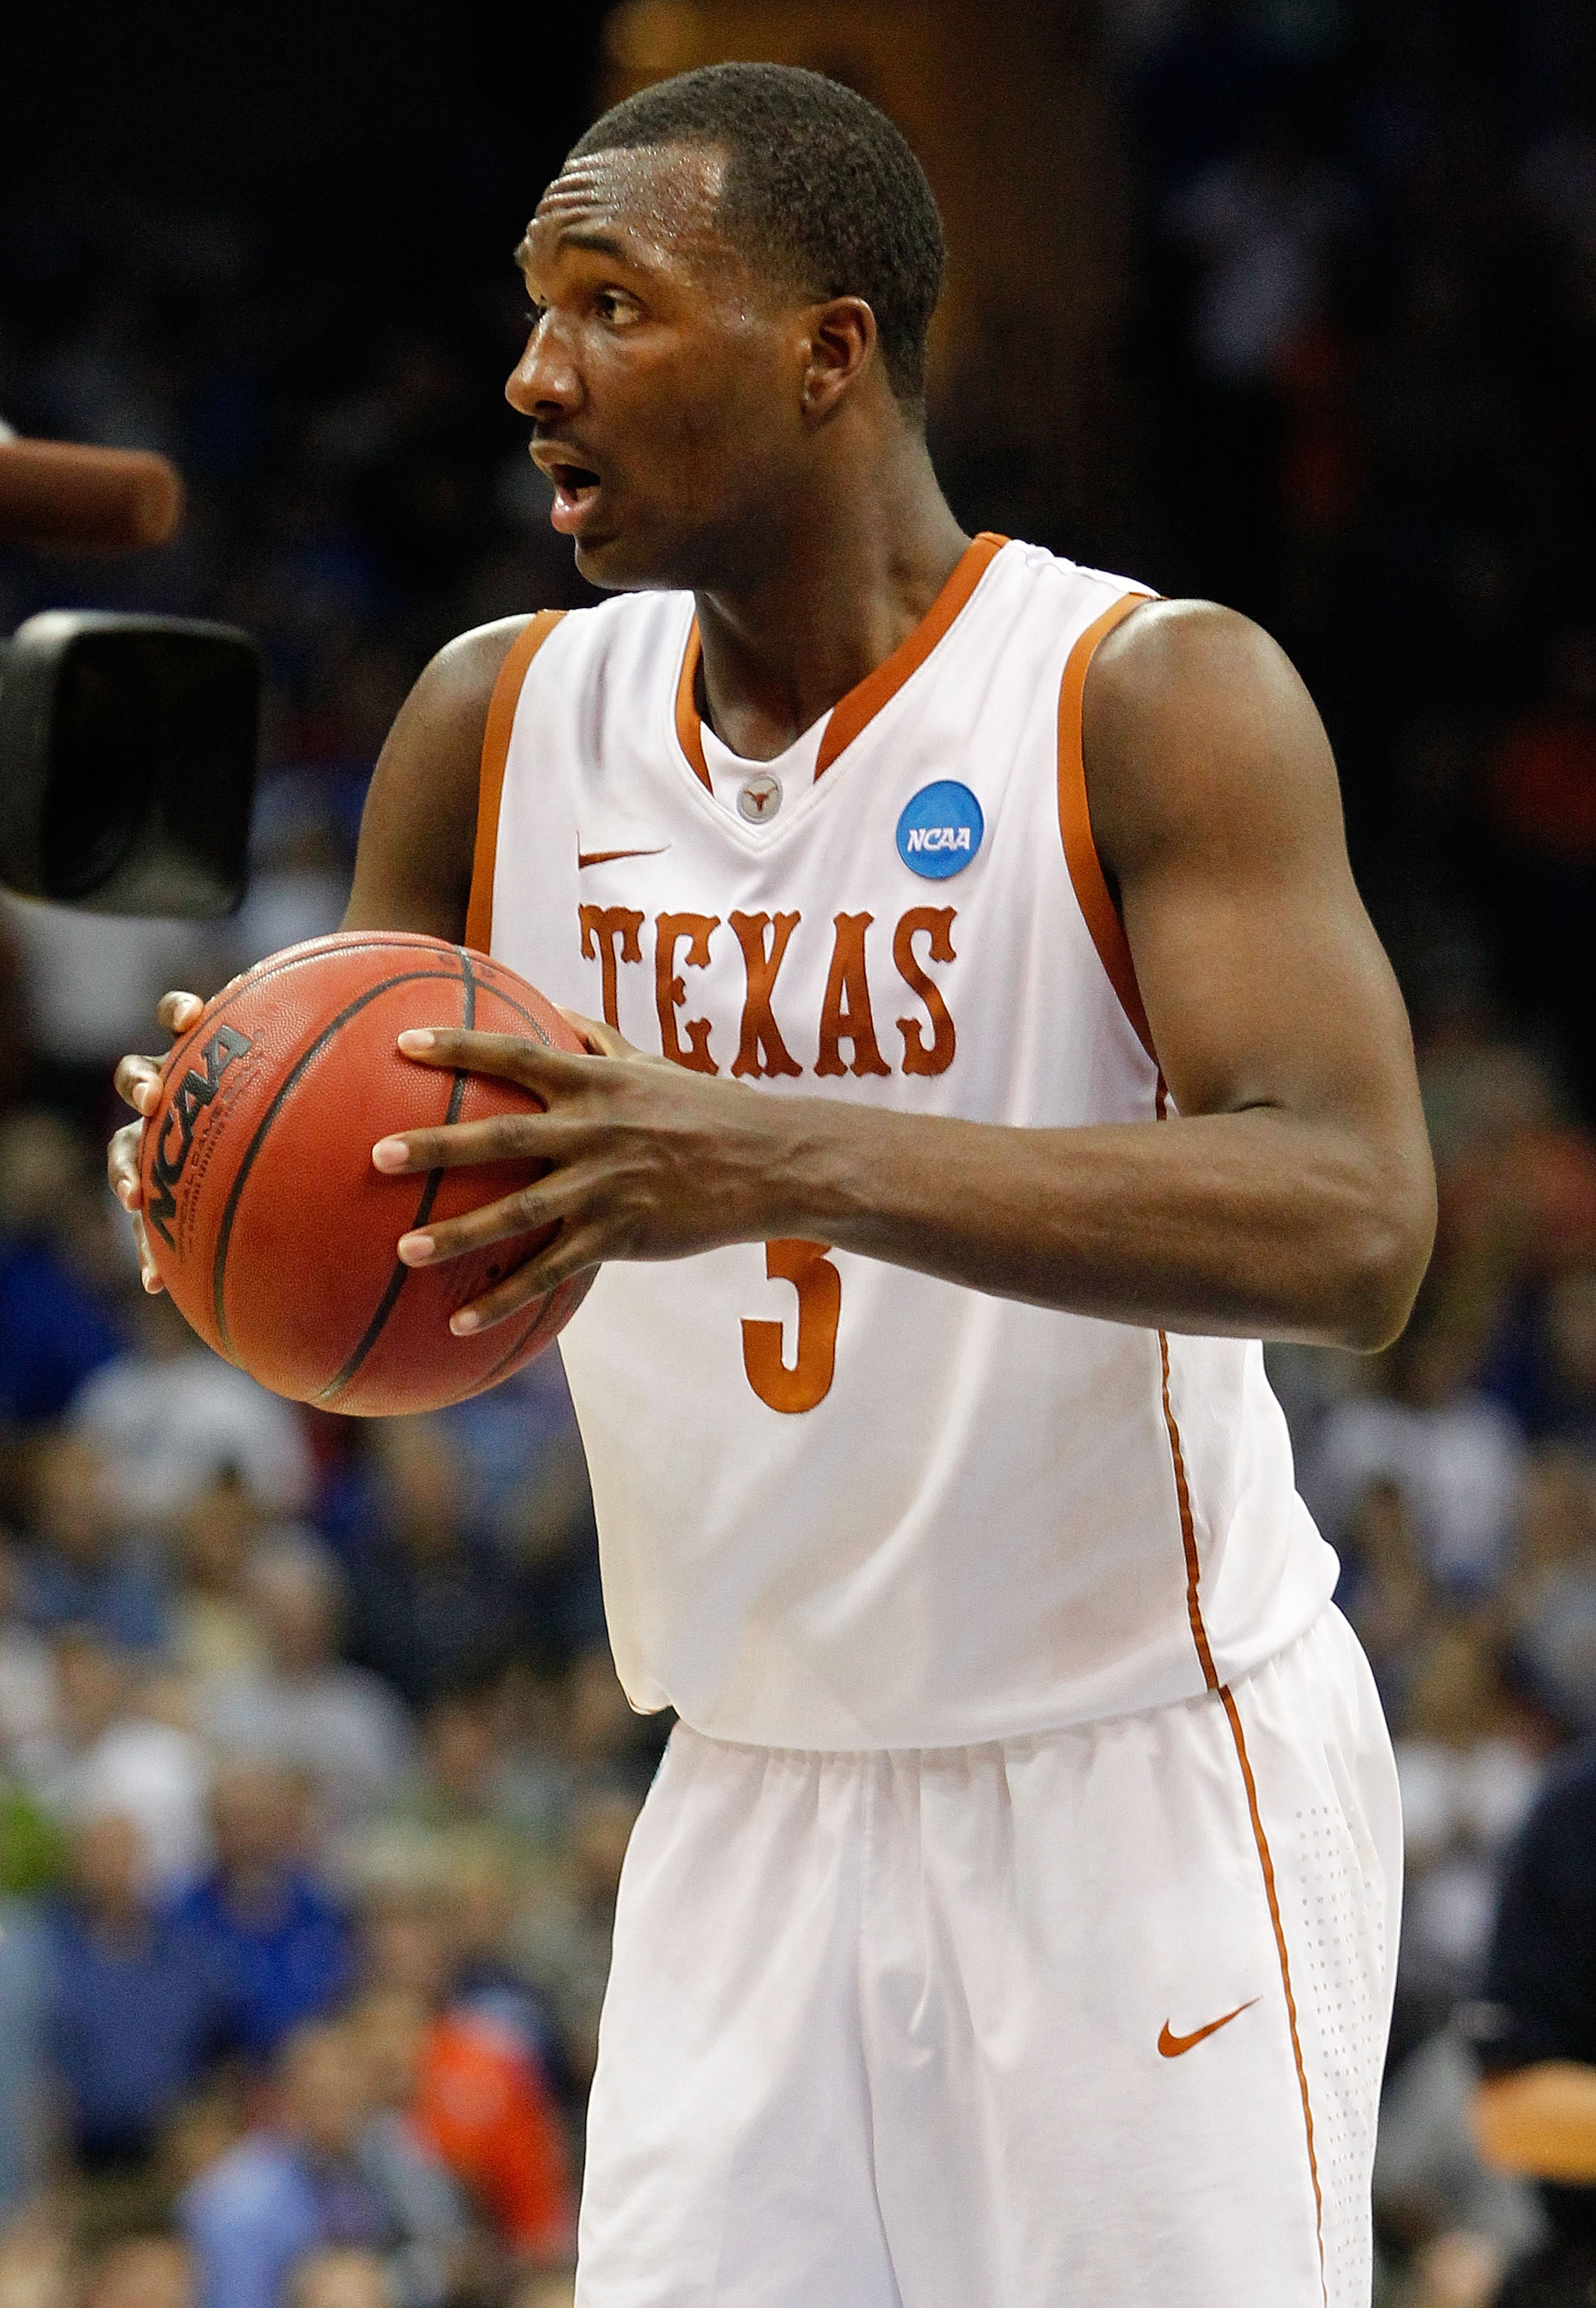 Goudelock Selected 46th Overall In The 2011 NBA Draft - College of